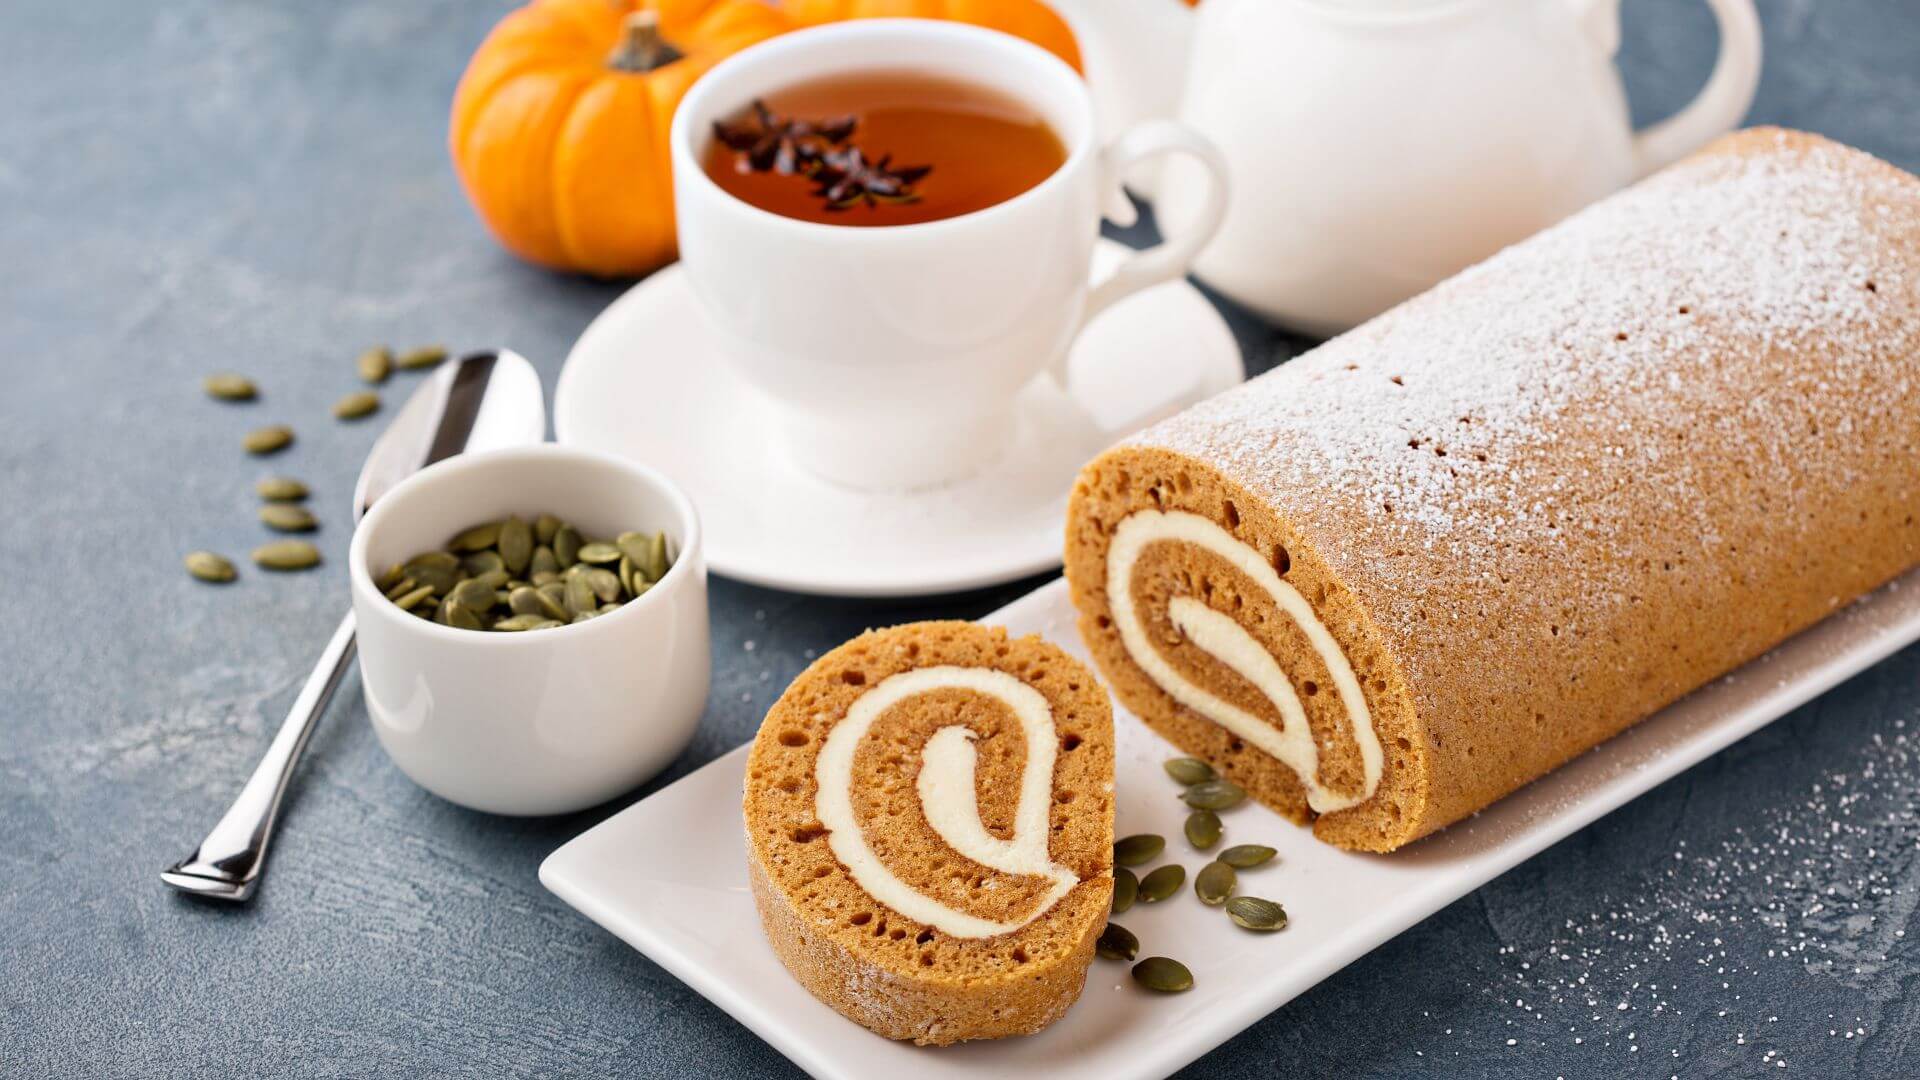 A delicate pumpkin roll with a creamy filling next to a cup of tea, pumpkin seeds and a teapot